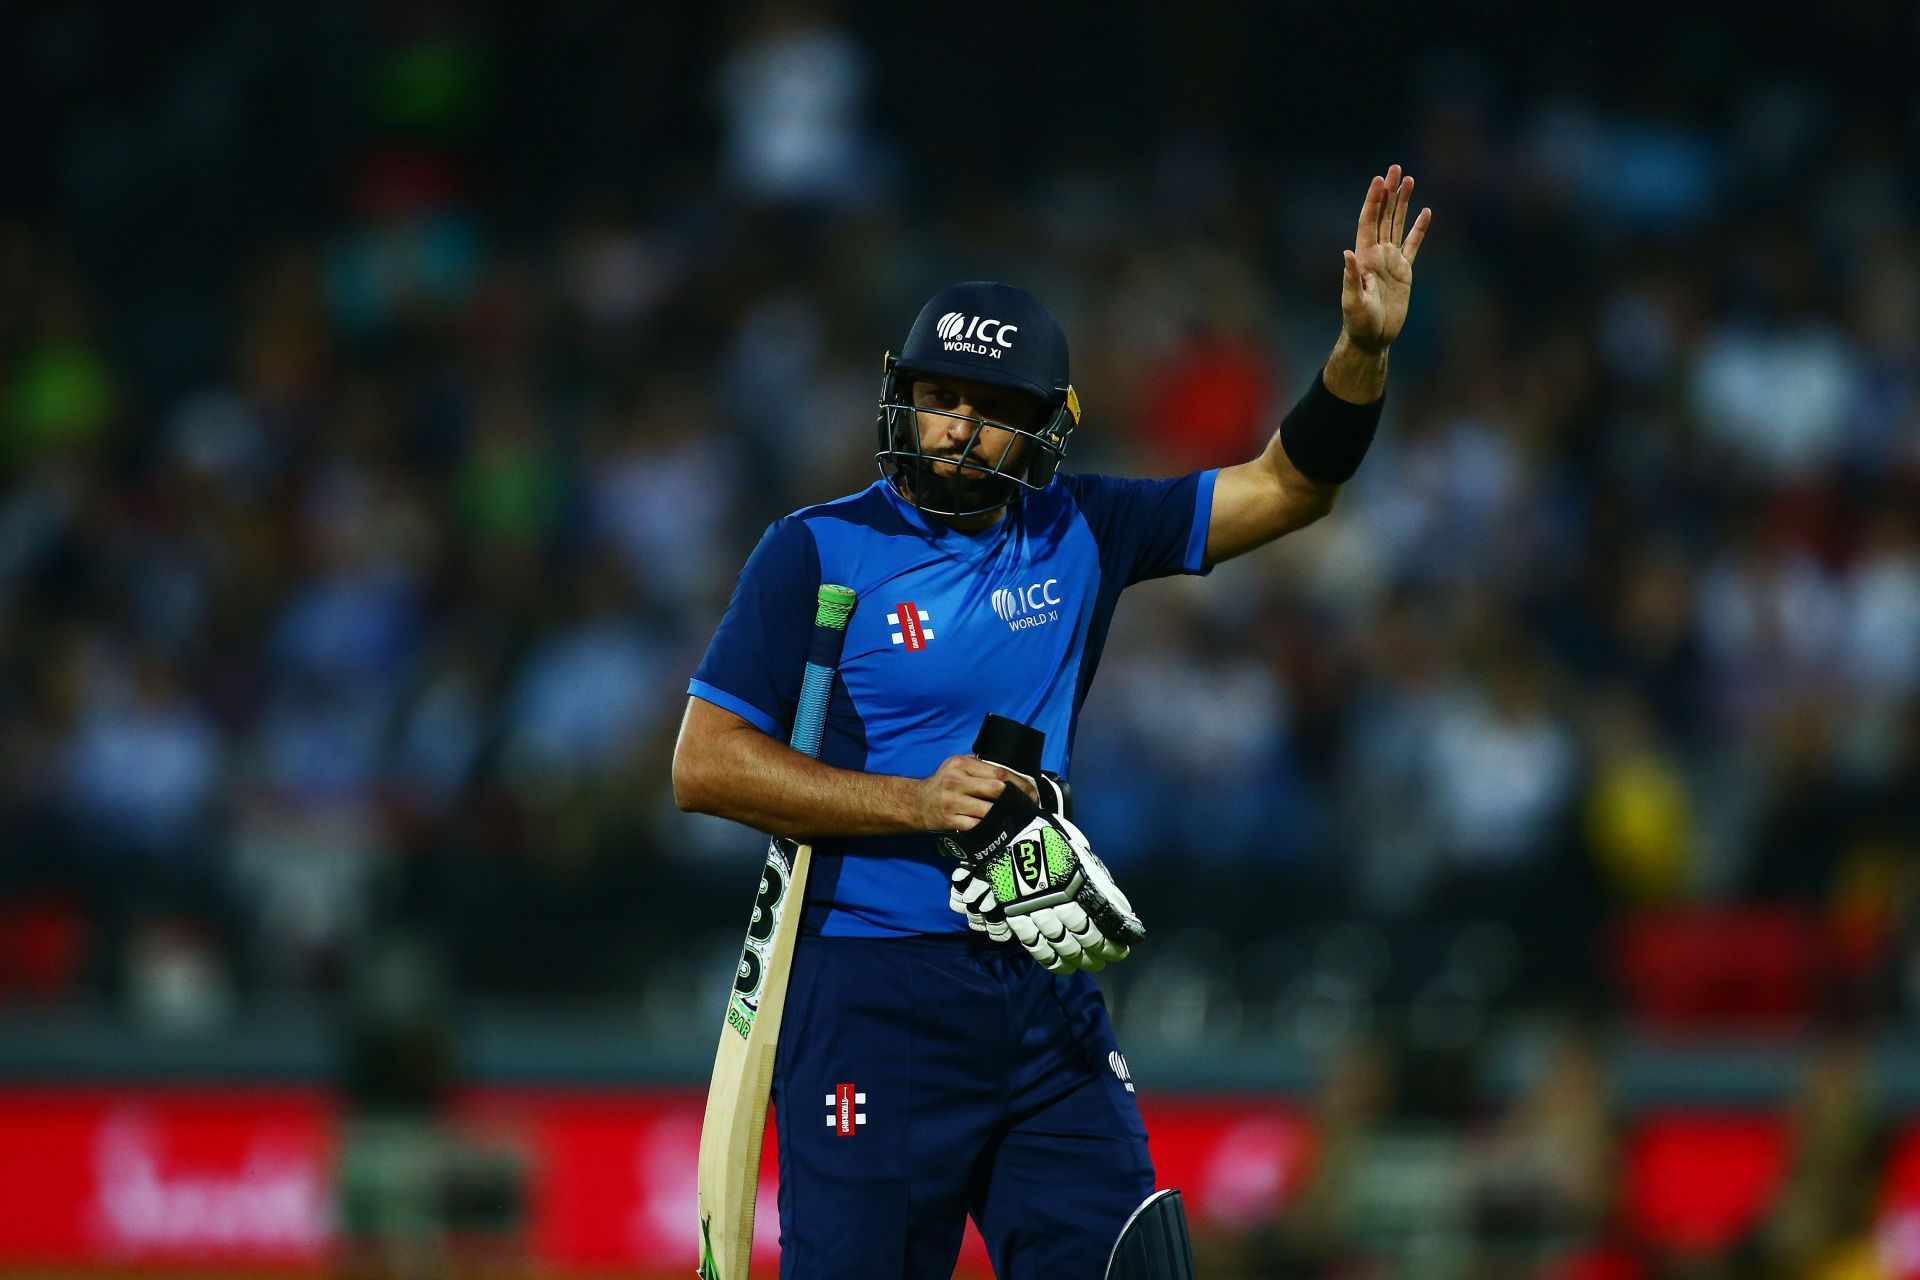 Shahid Afridi has been a part of many controversies. (Image: Getty)